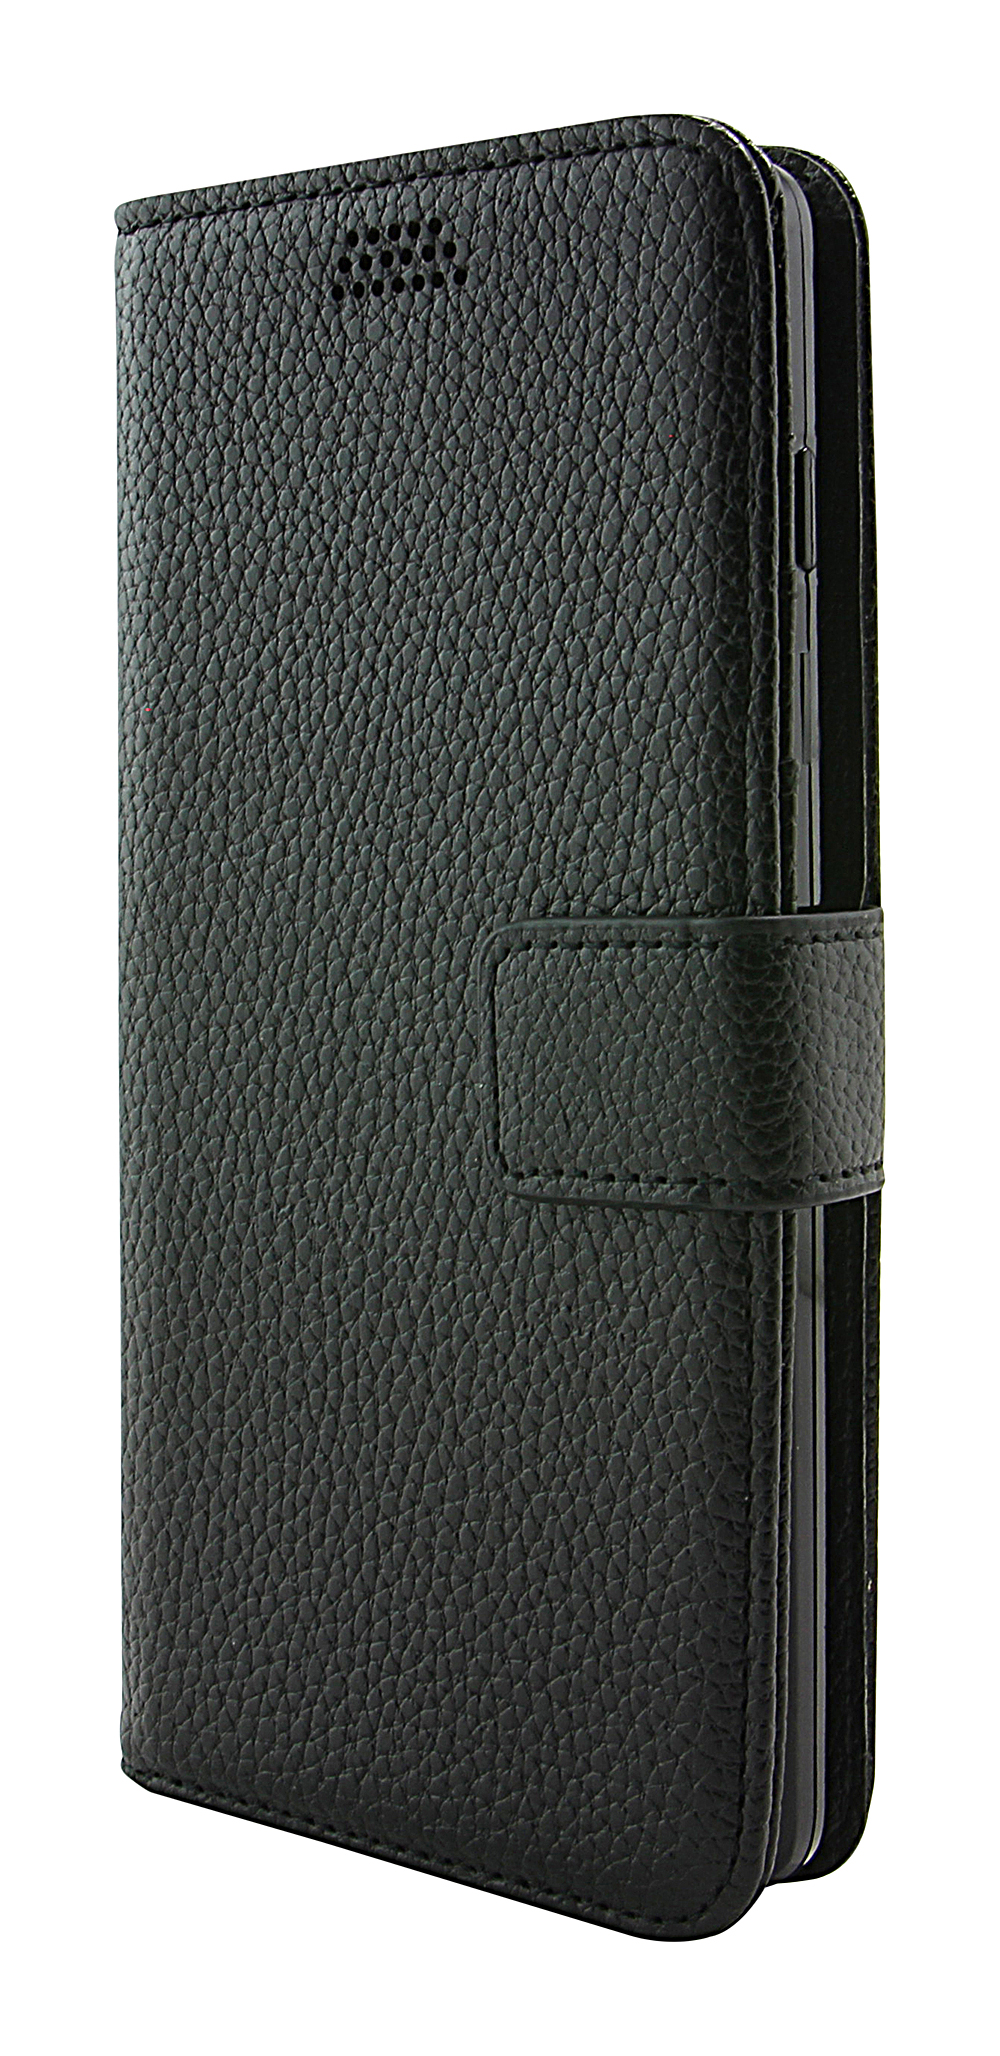 New Standcase Wallet Sony Xperia L4